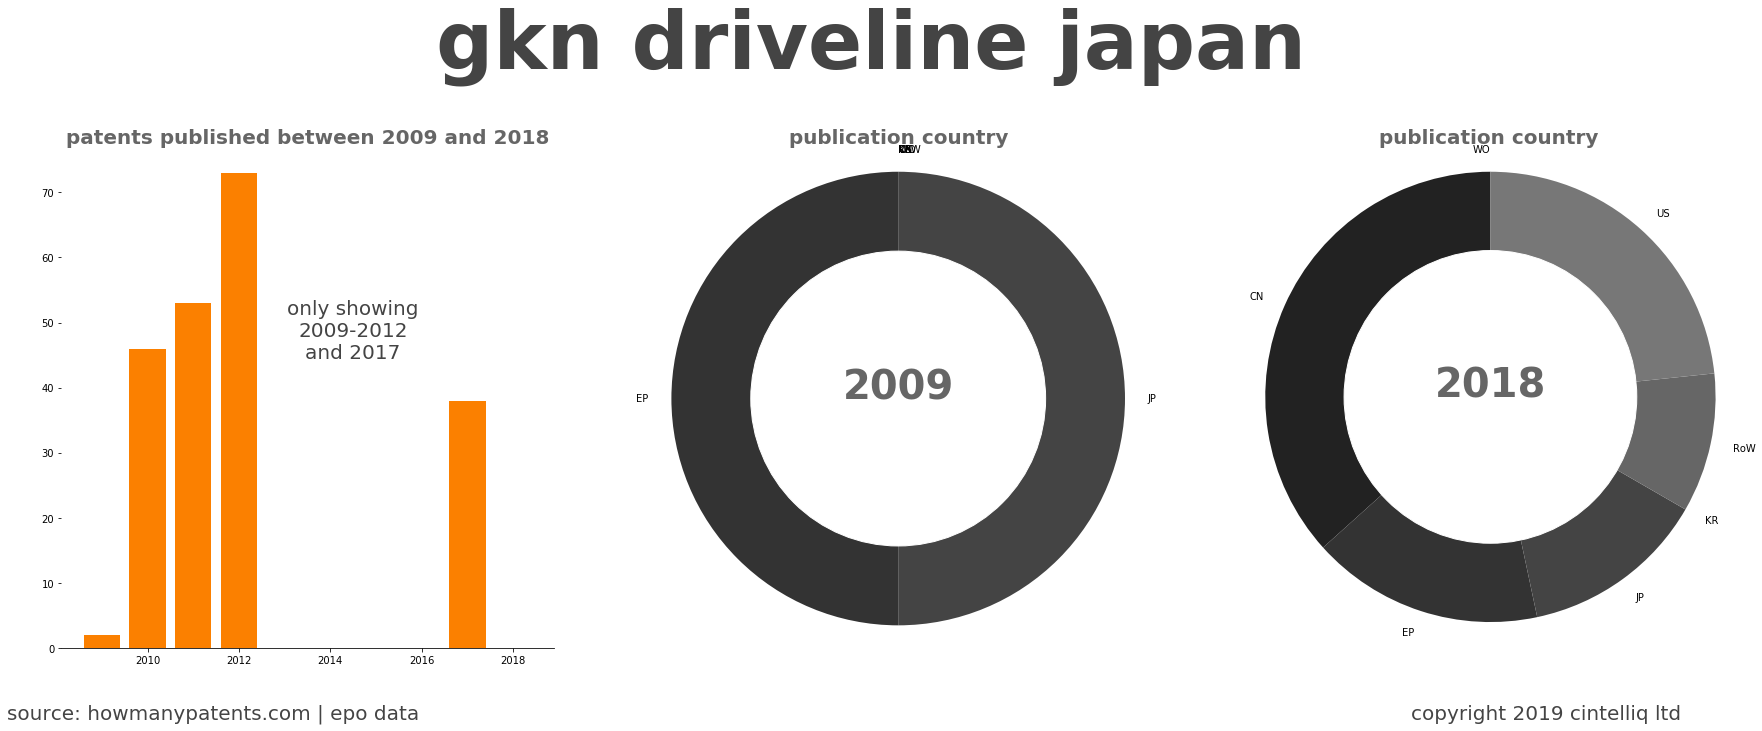 summary of patents for Gkn Driveline Japan